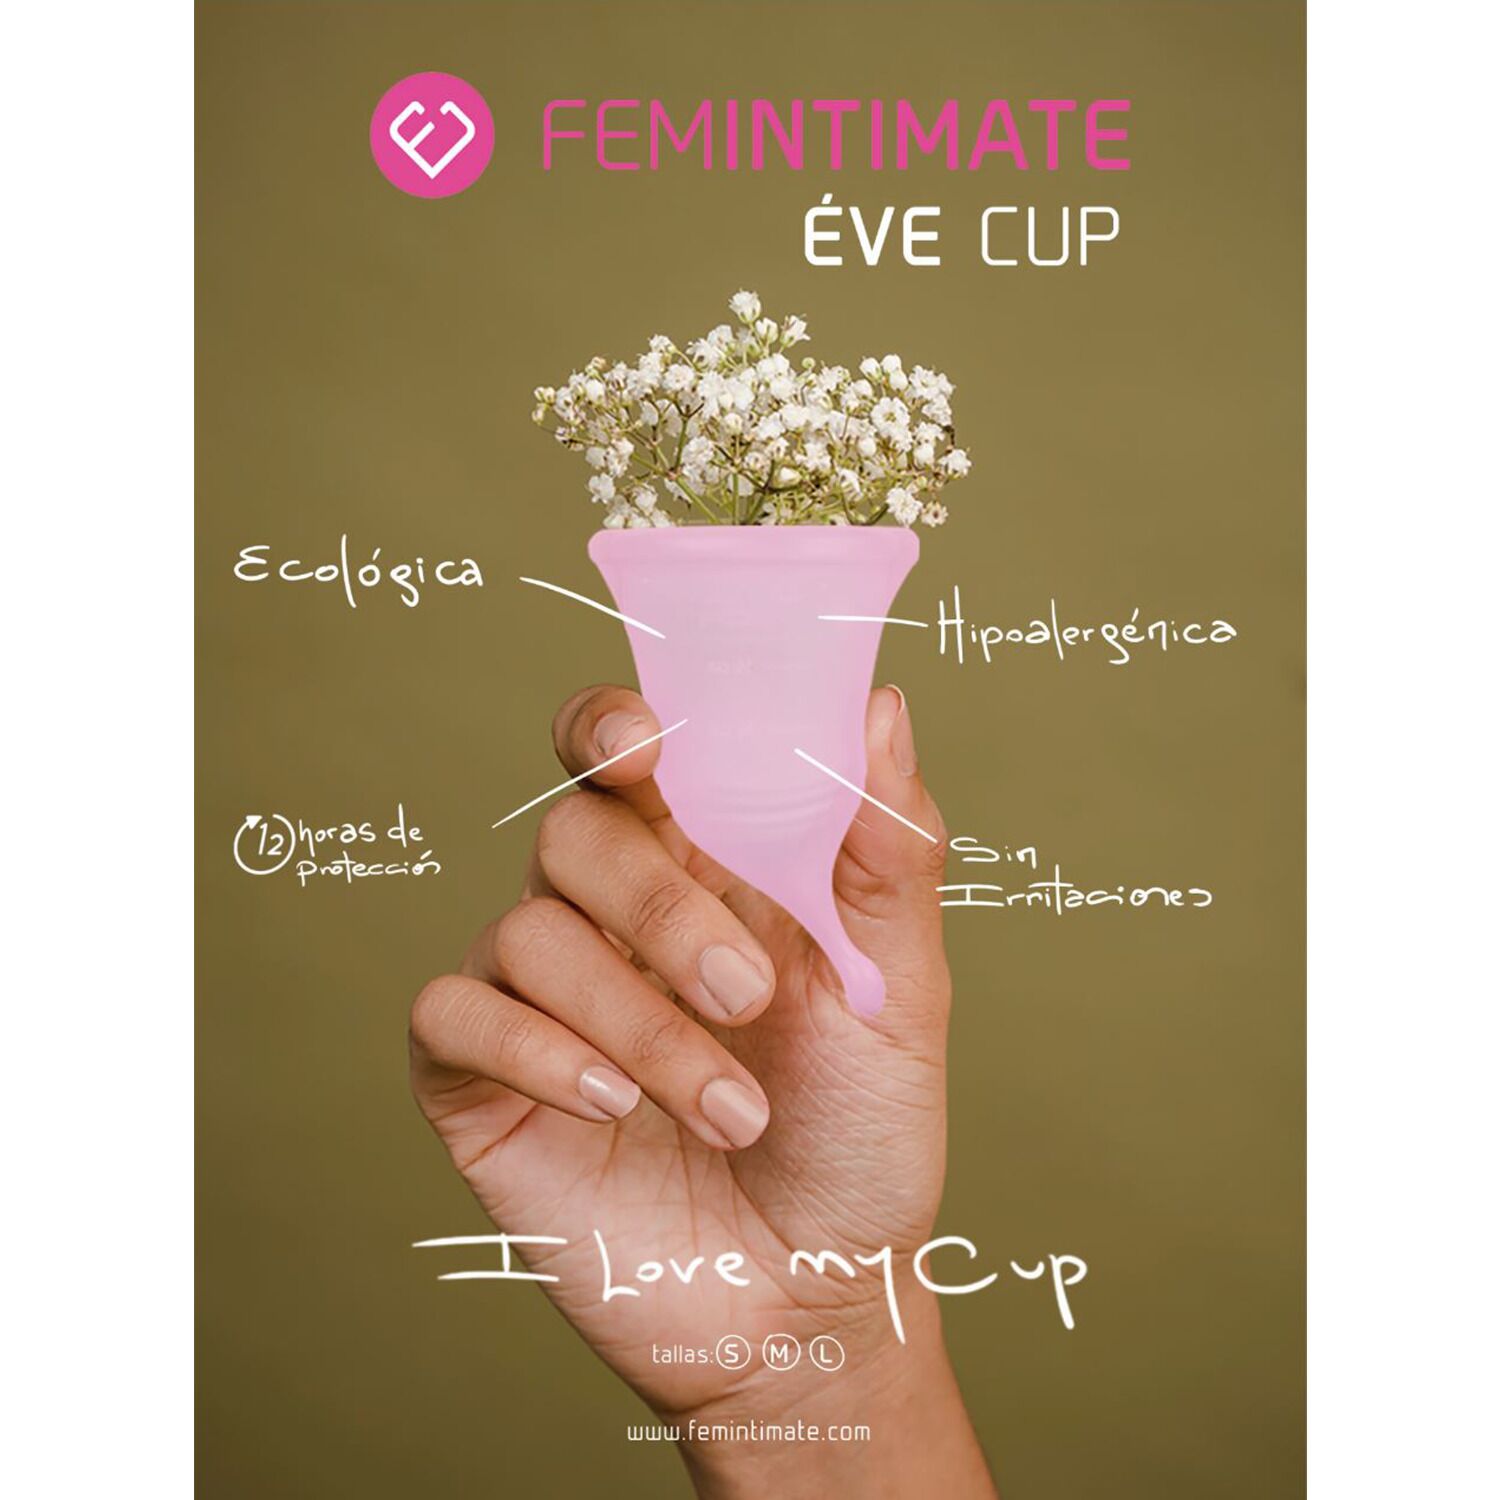   Femintimate Eve Cup New  M